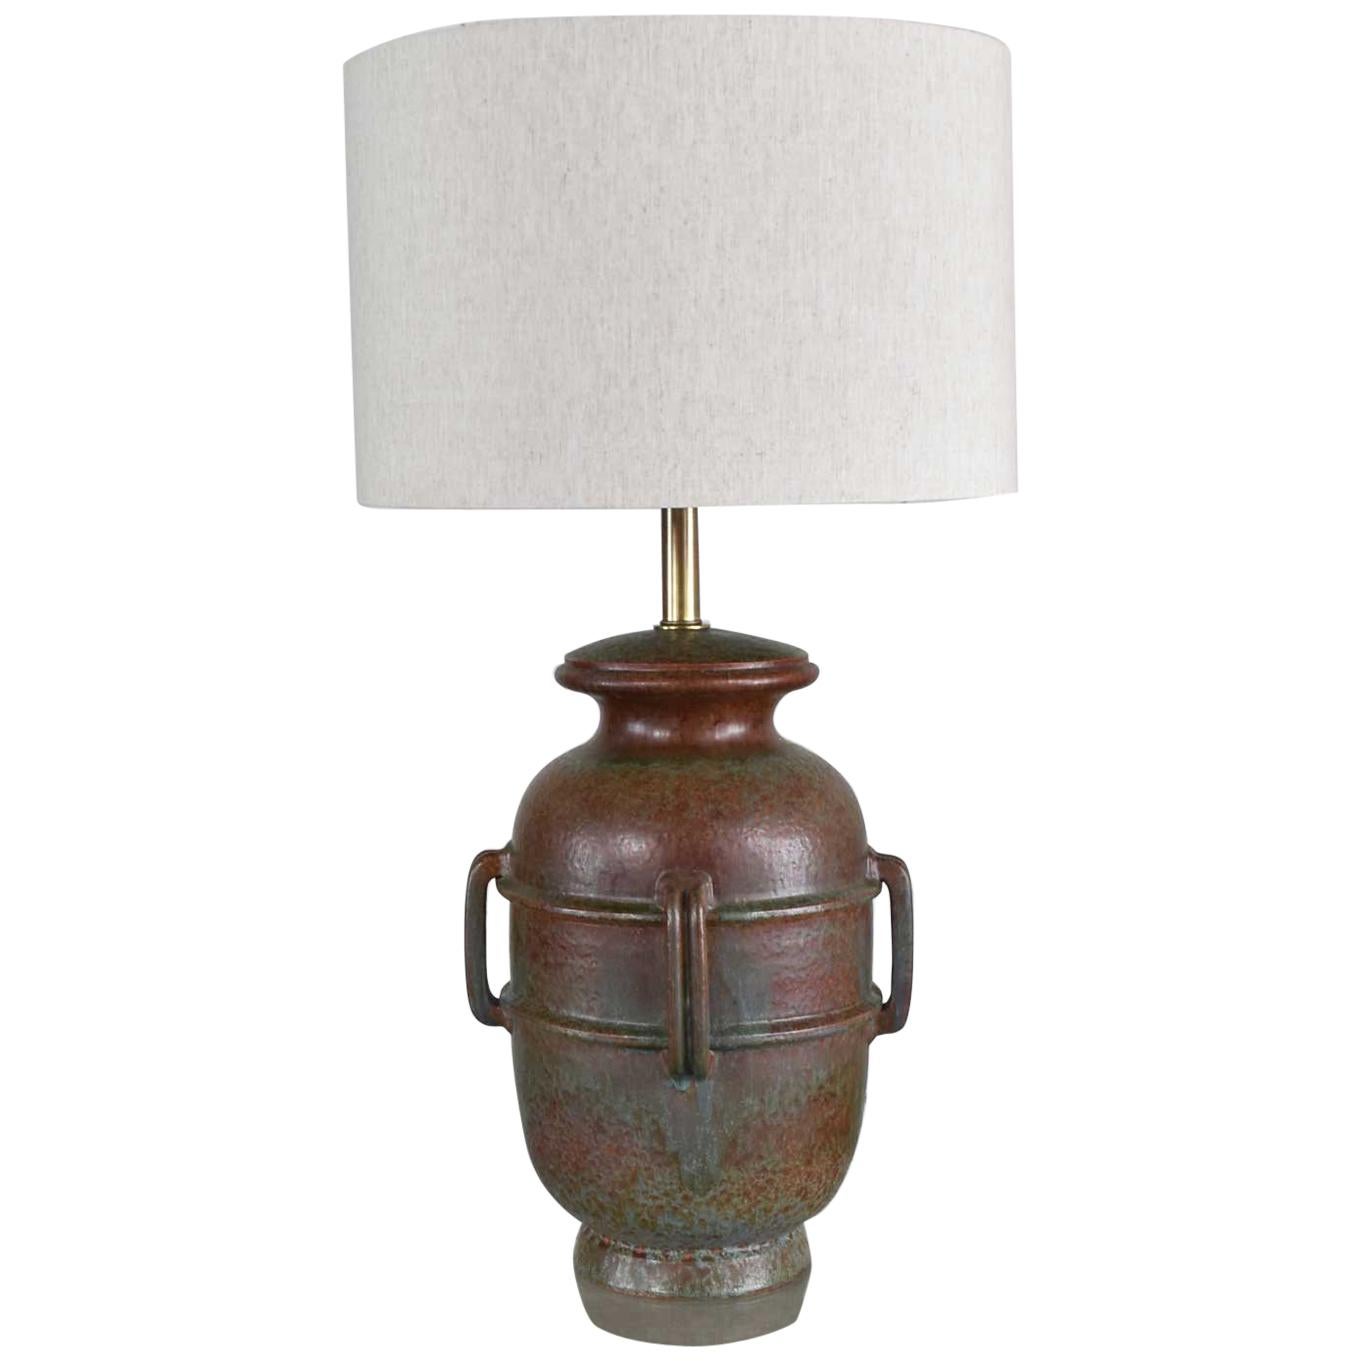 MCM Italian Green Pottery Lamp by Raymor Attributed to Alvino Bagni